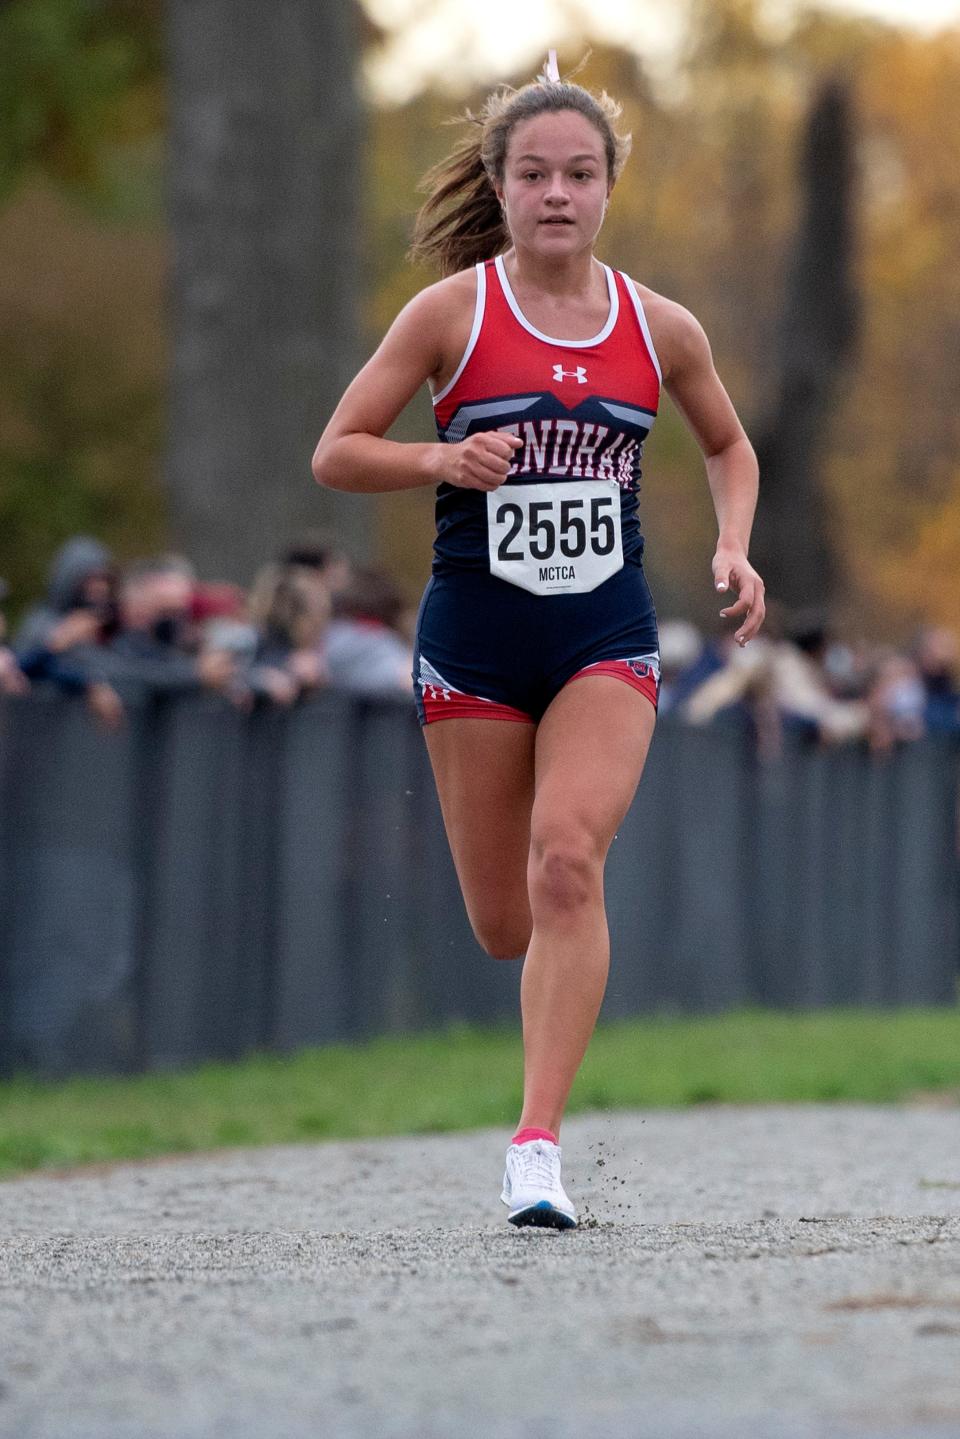 NJAC large-school cross country championships was held at Central Park of Morris County on October 27, 2020. #2555 Grace Vives of Mendham HS placed second with a time of 19:33.98.